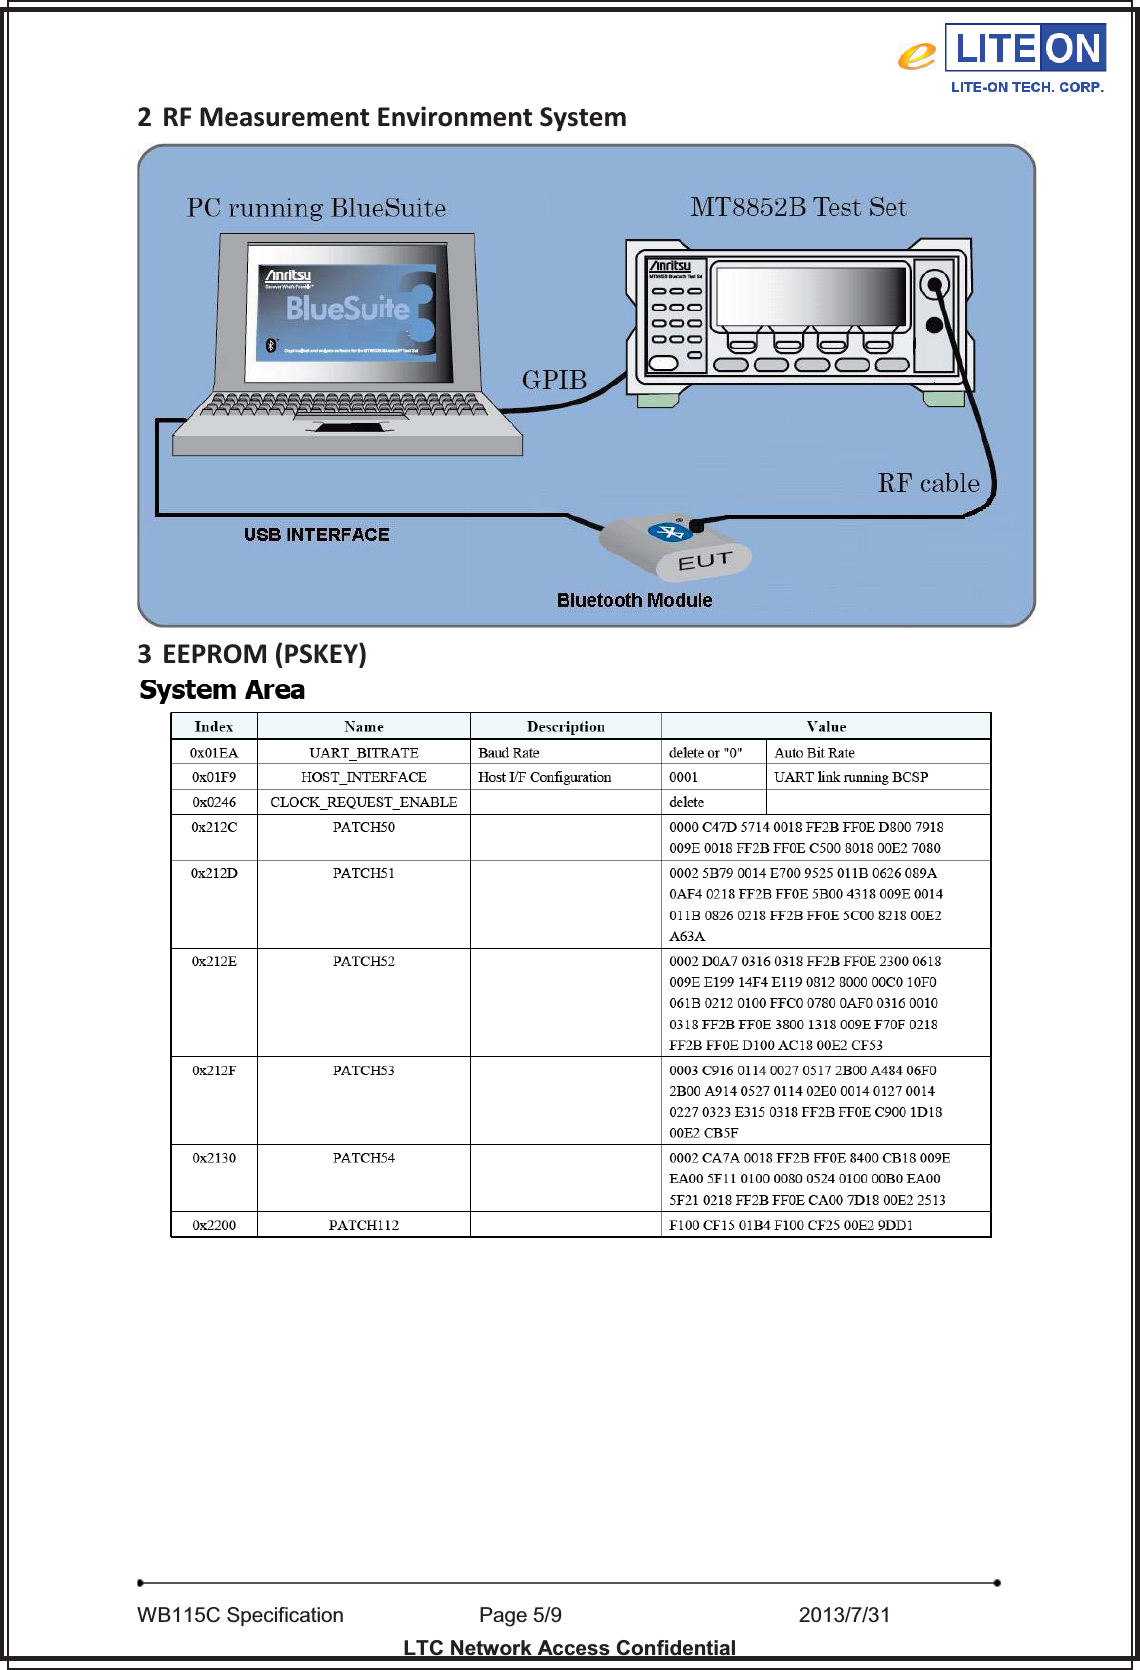   WB115C Specification        Page 5/9                    2013/7/31  LTC Network Access Confidential 2 RF Measurement Environment System 3 EEPROM (PSKEY) 